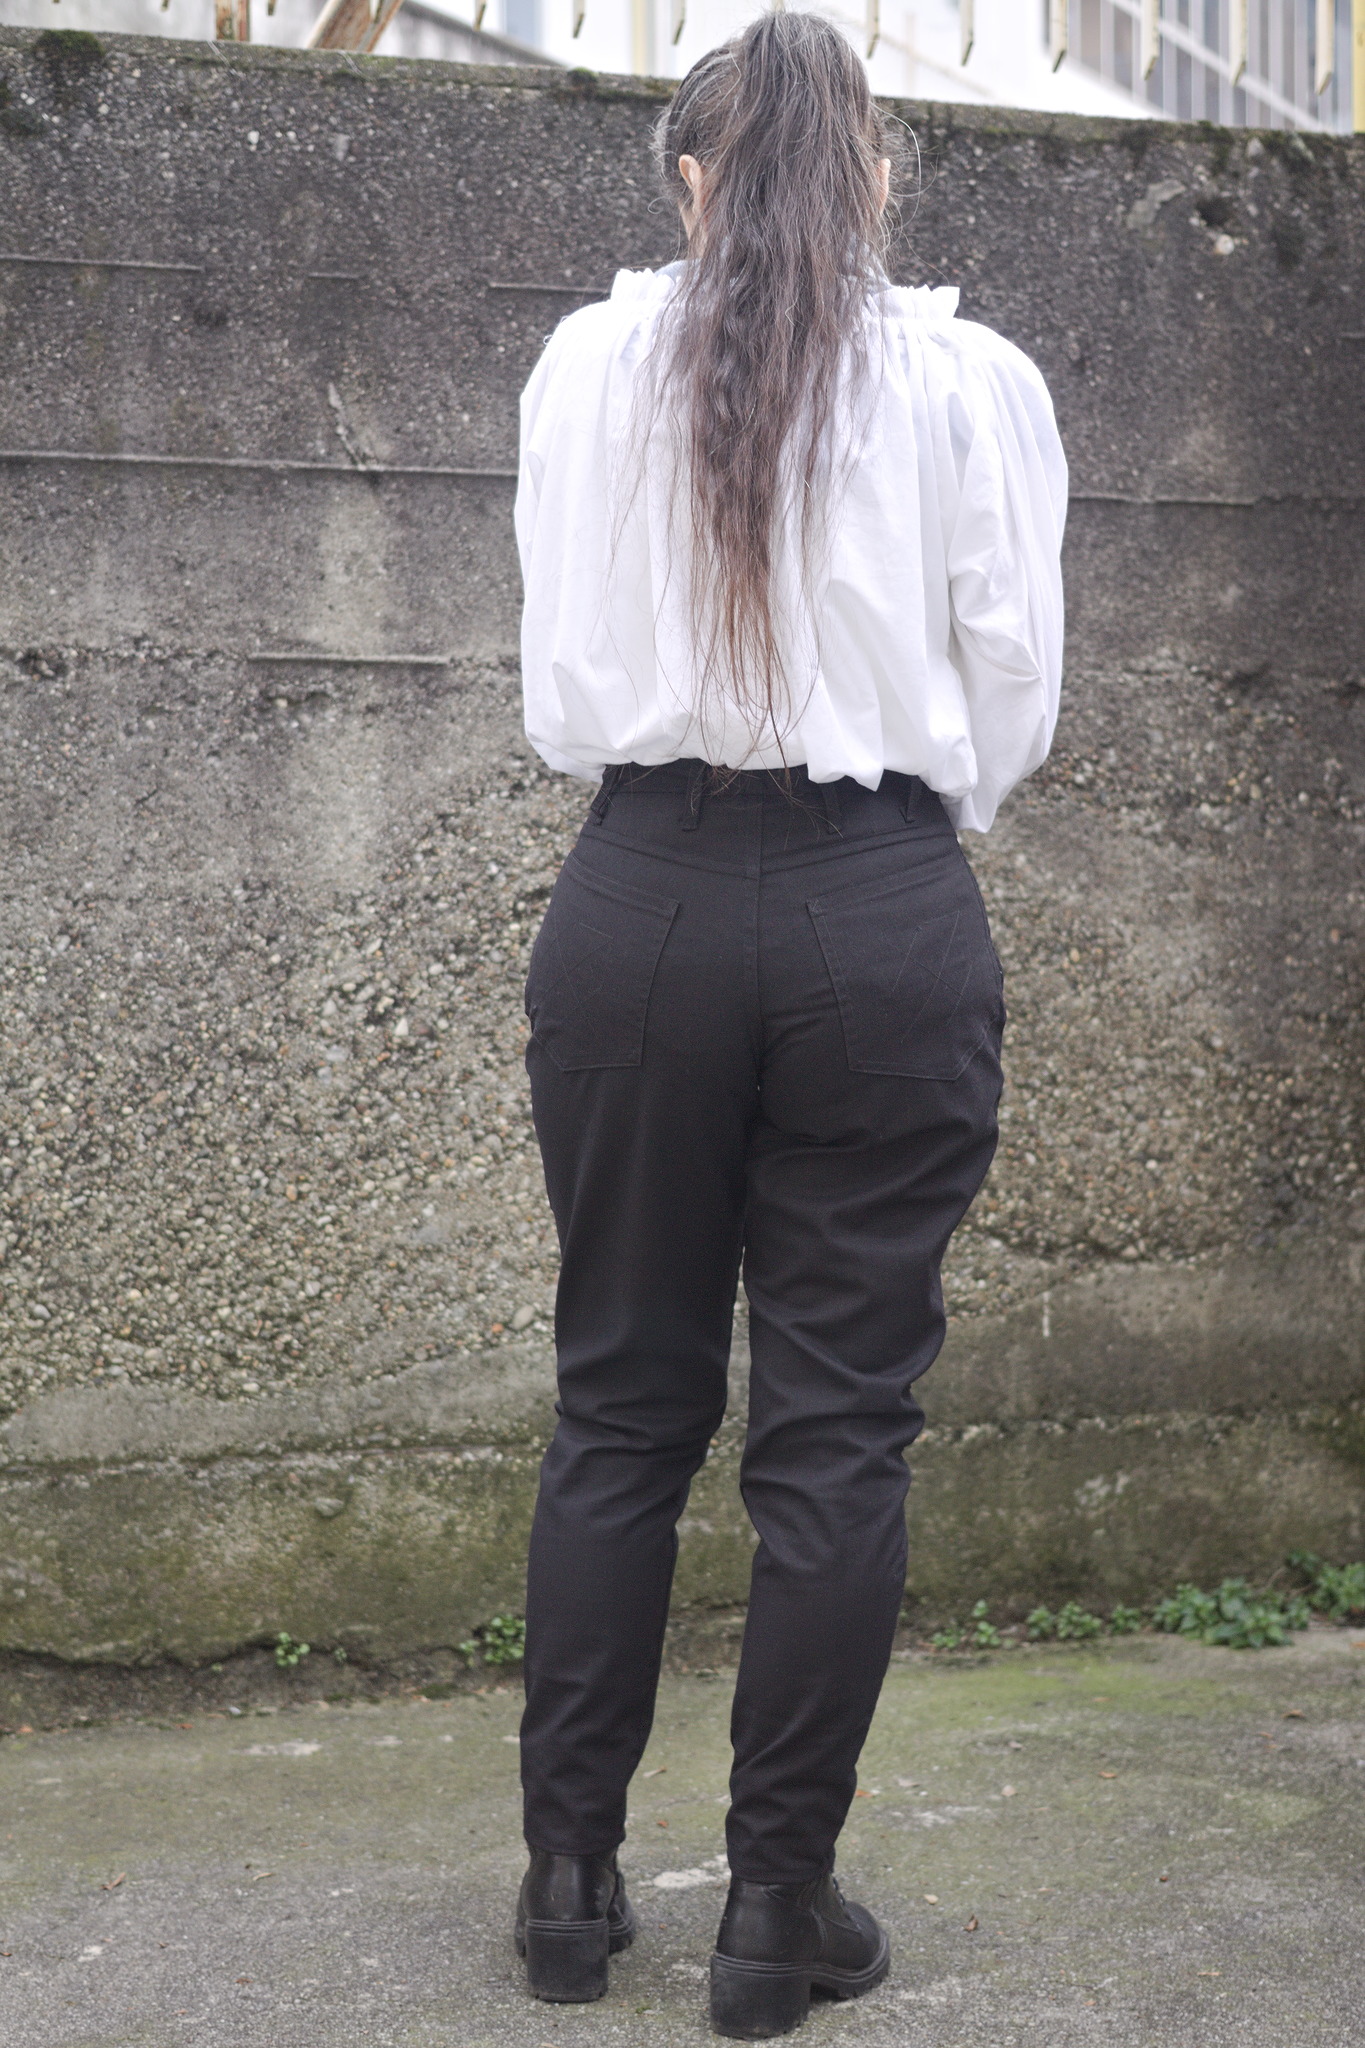 Same as above, from the back, with the crotch seam pulling a bit. A faint decoration can be seen on the pockets, with the line art version of the logo seen on this blog.